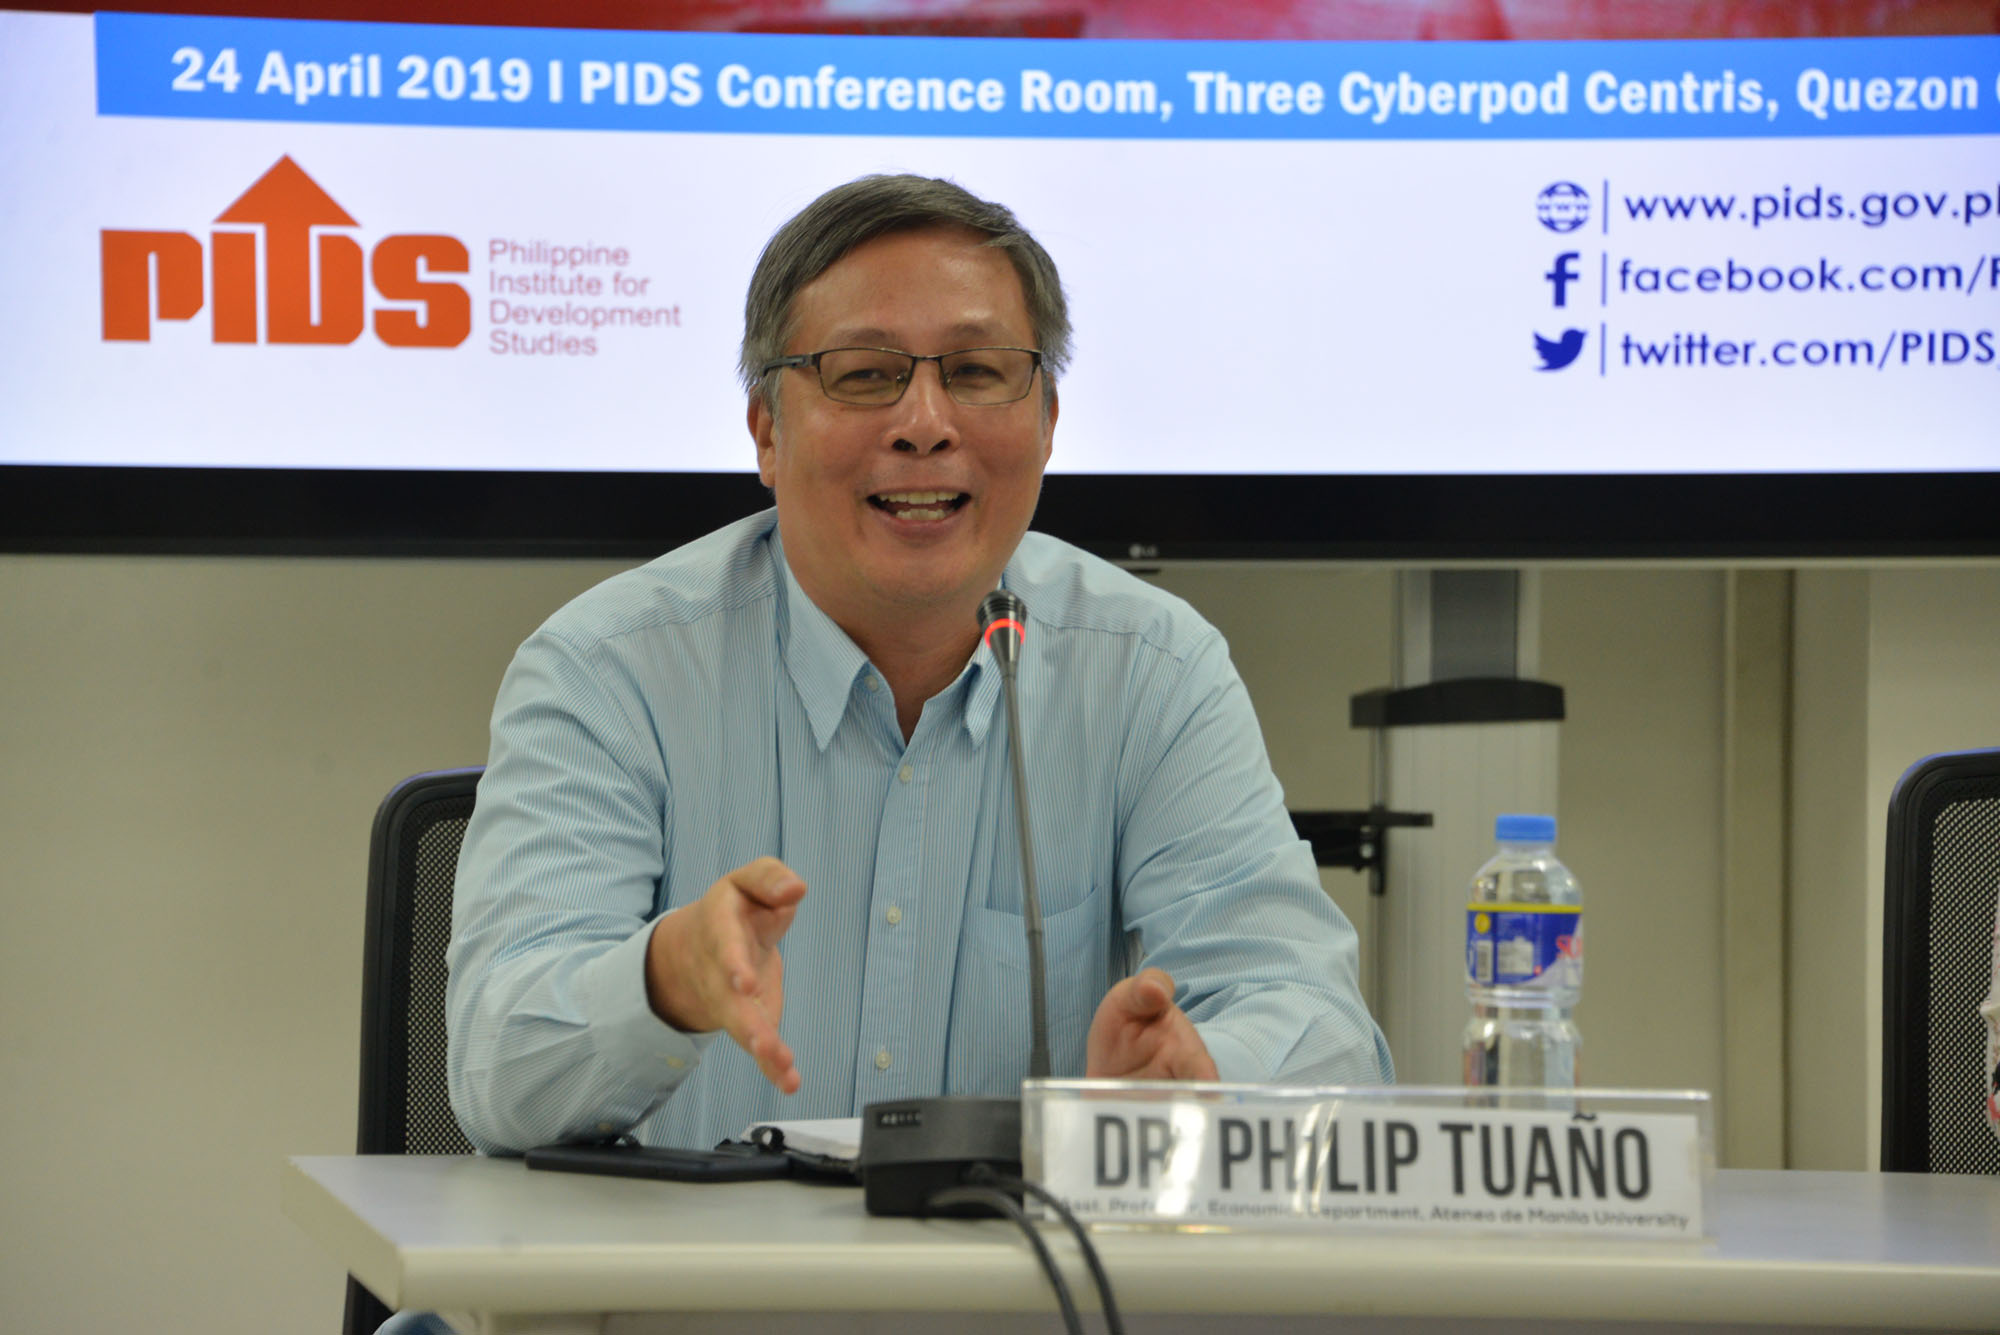 2017 Tax Reform for Acceleration and Inclusion: Issues and Challenges-pids-train-10-20190424.jpg